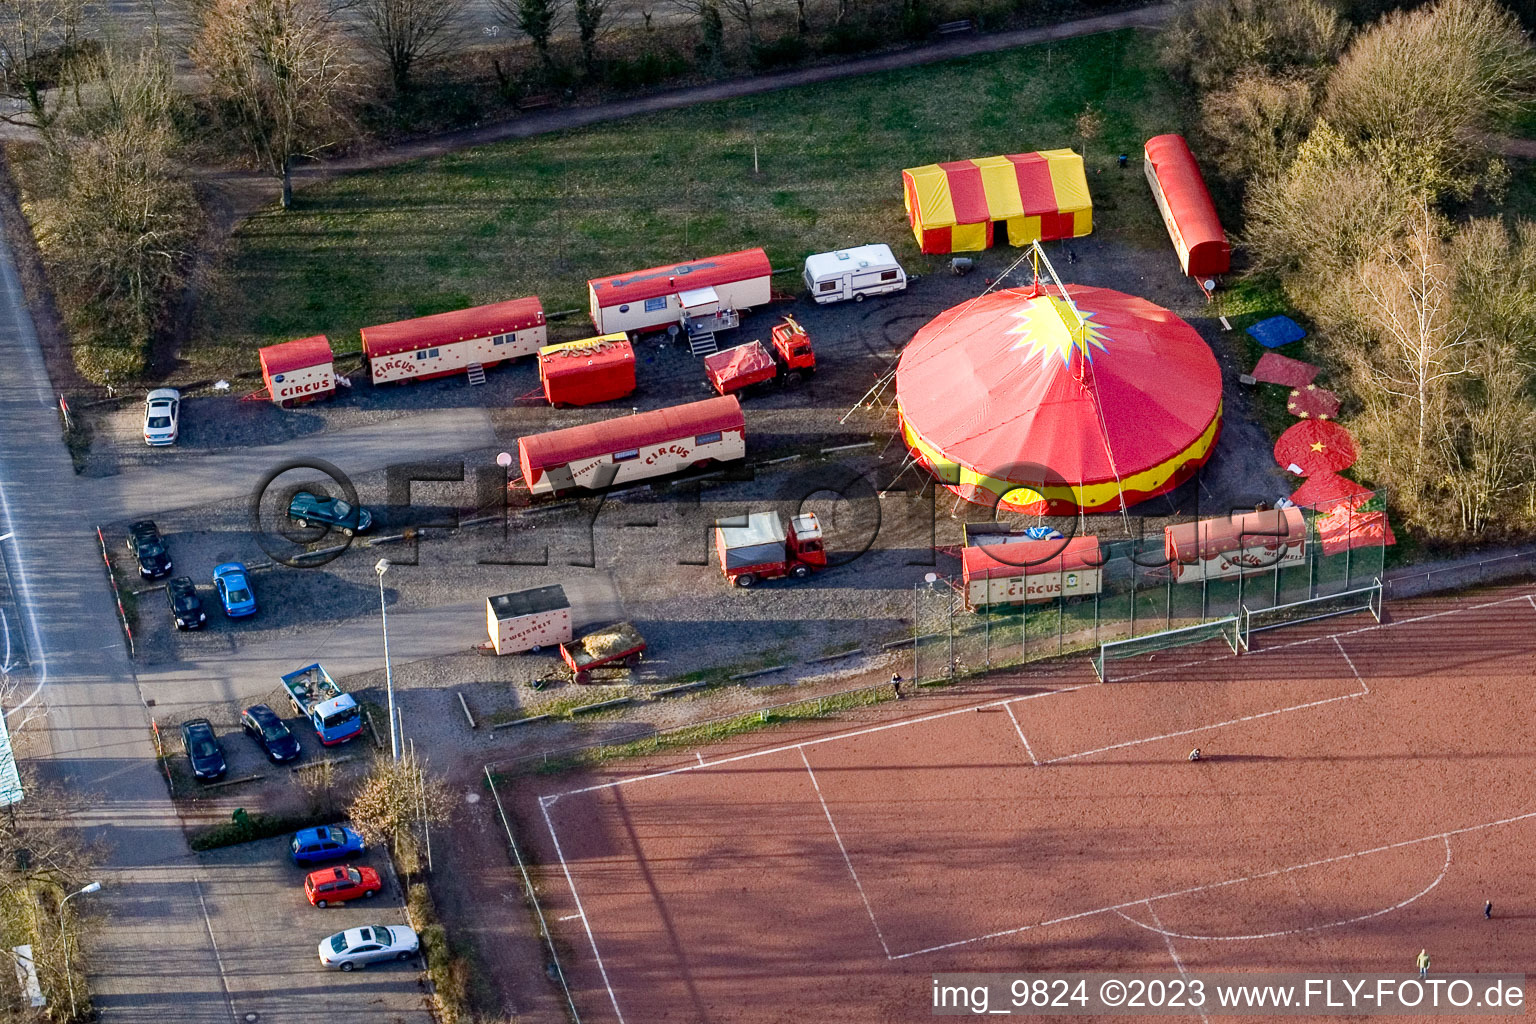 Bird's eye view of Circus wisdom at the sports field in Kandel in the state Rhineland-Palatinate, Germany